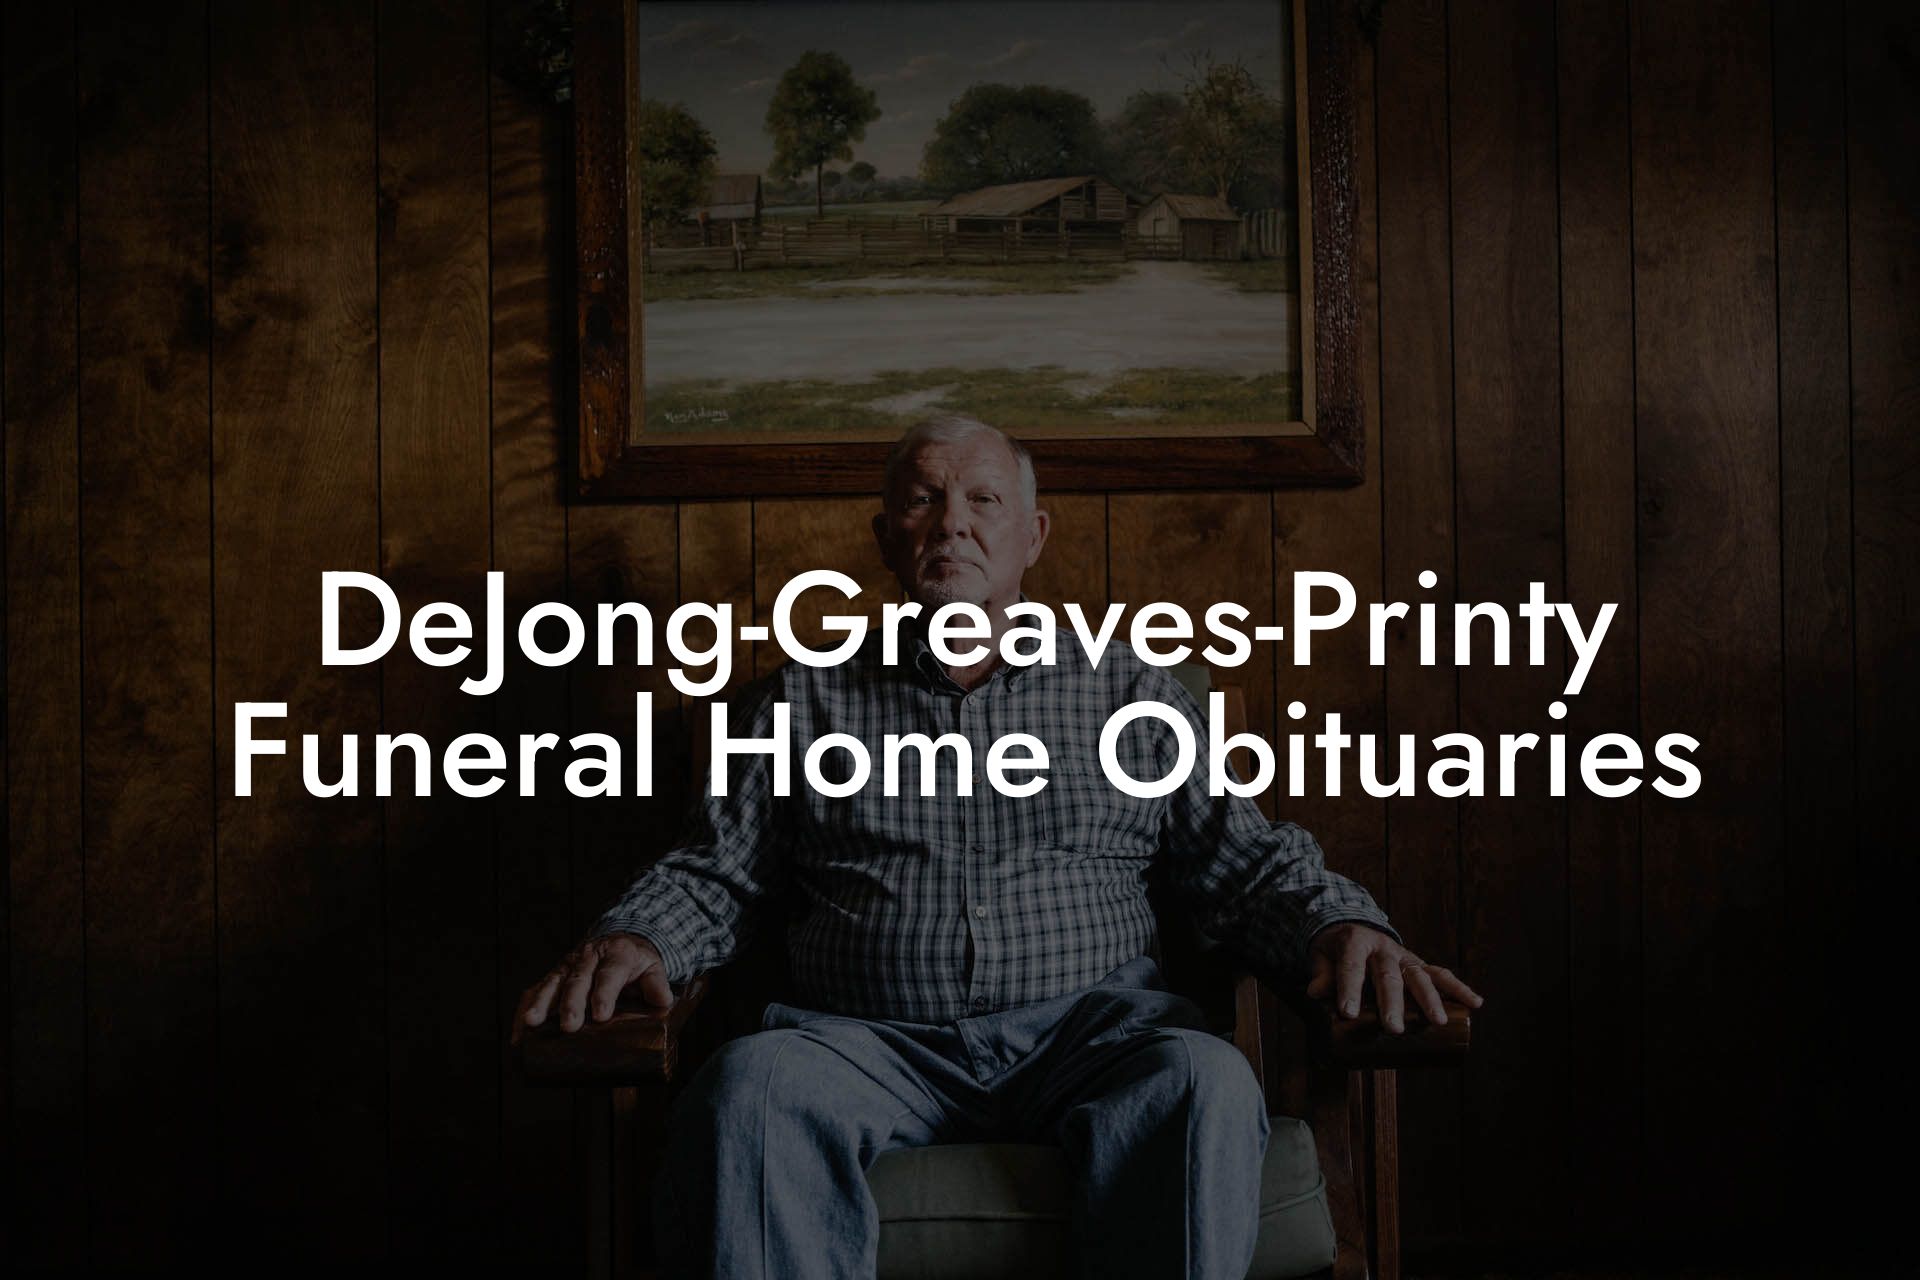 DeJong-Greaves-Printy Funeral Home Obituaries